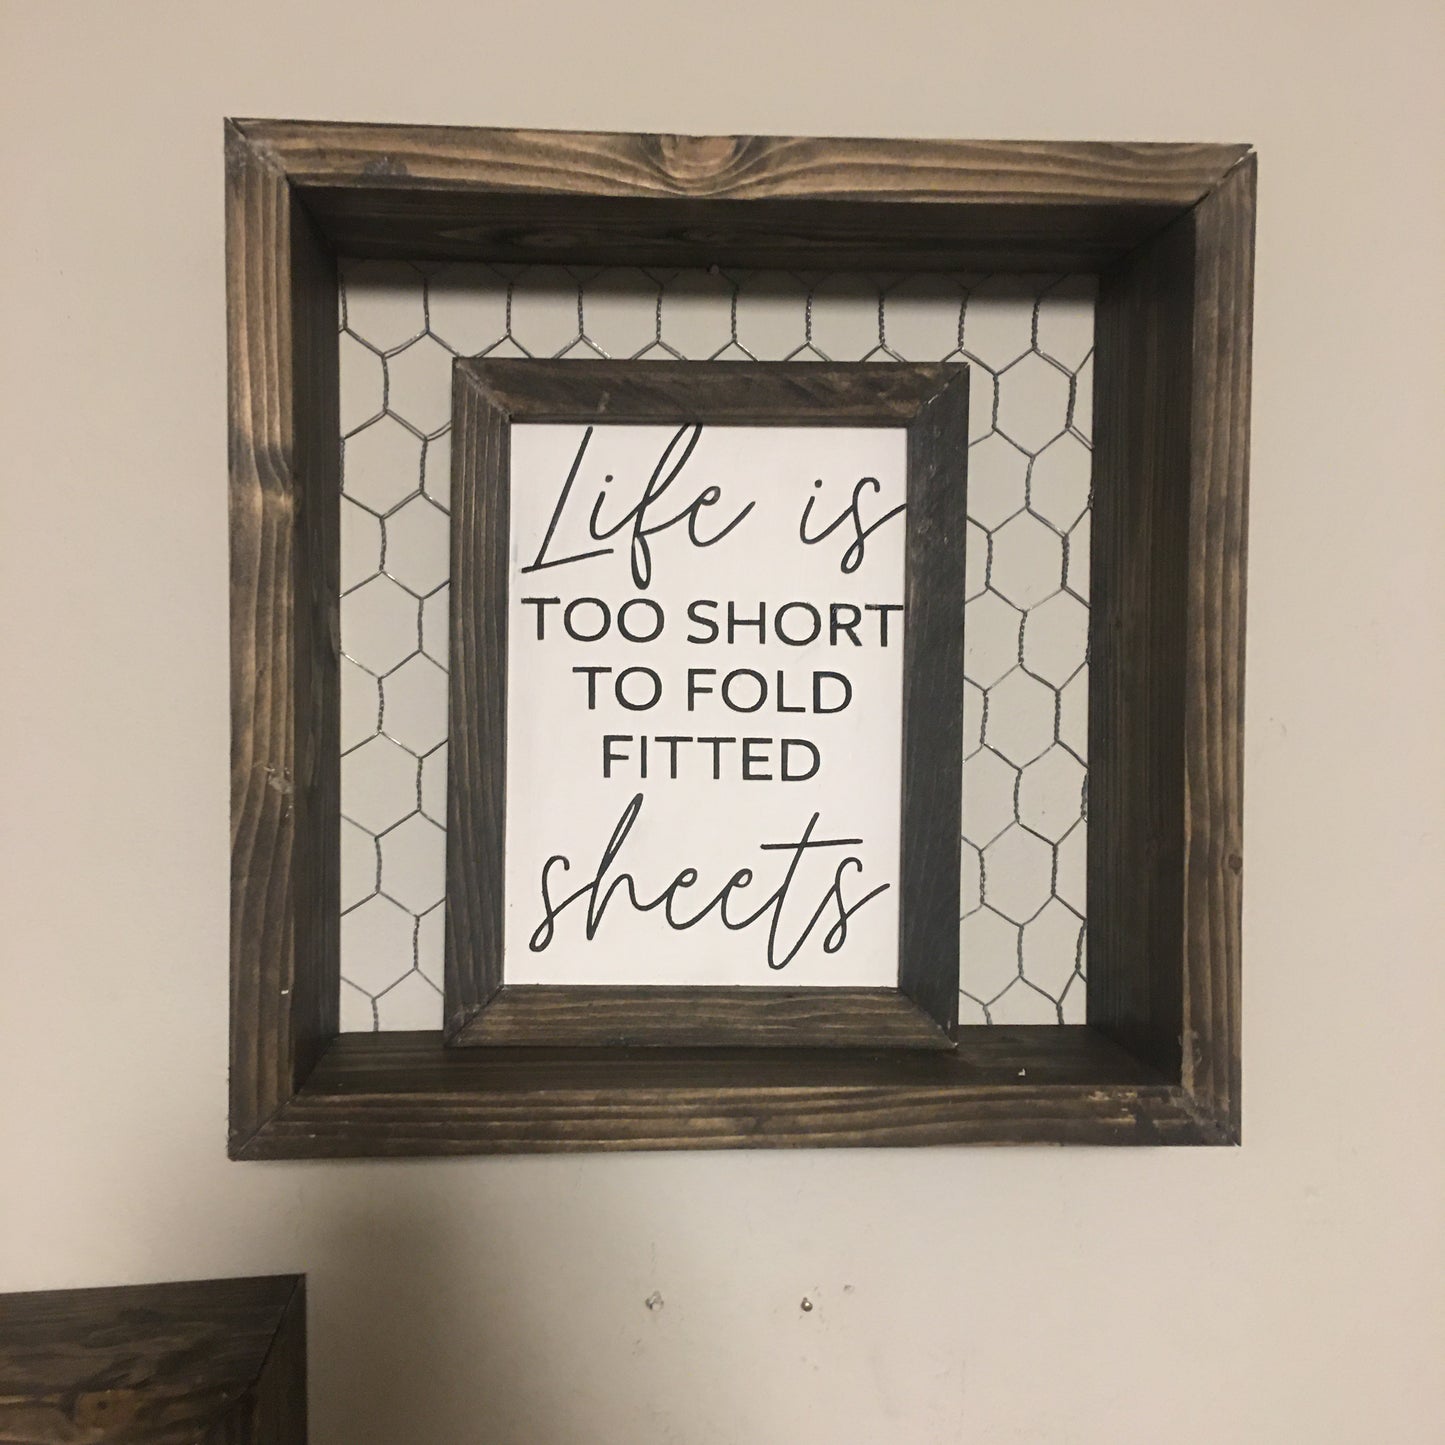 Life is too short to fold fitted sheets